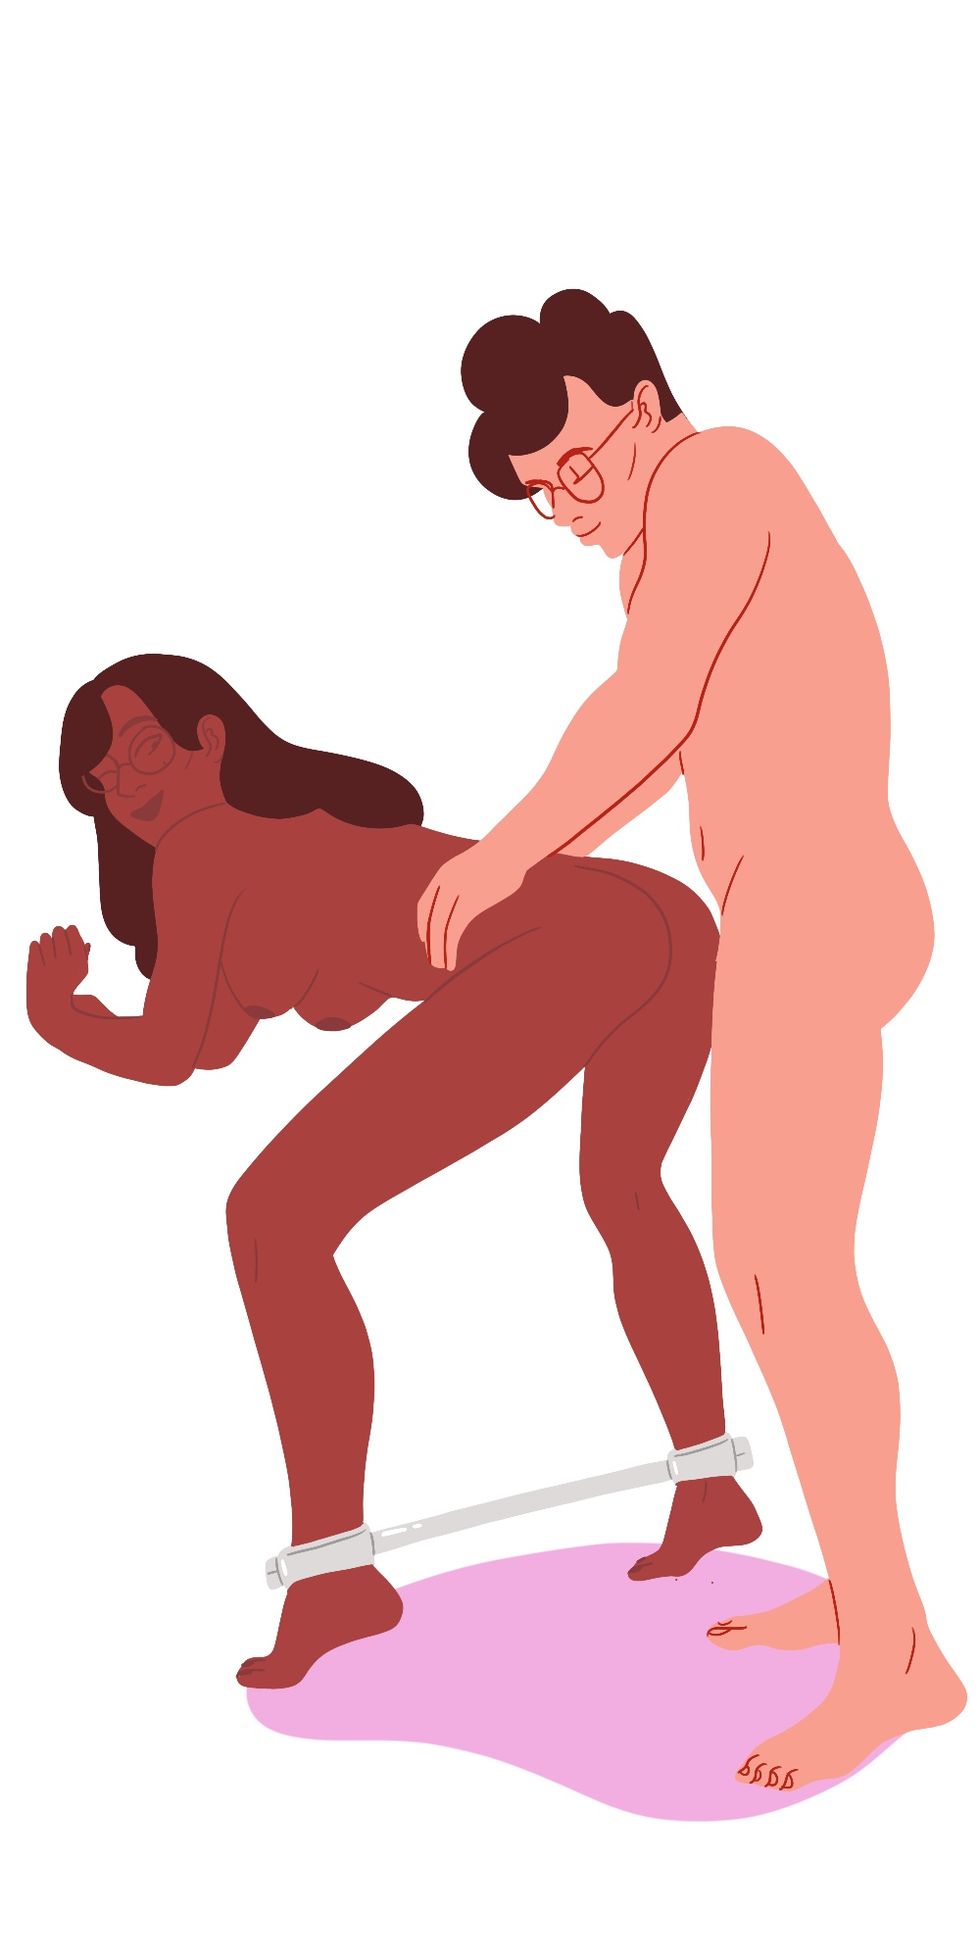 submissive sex positions, best submissive sex positions